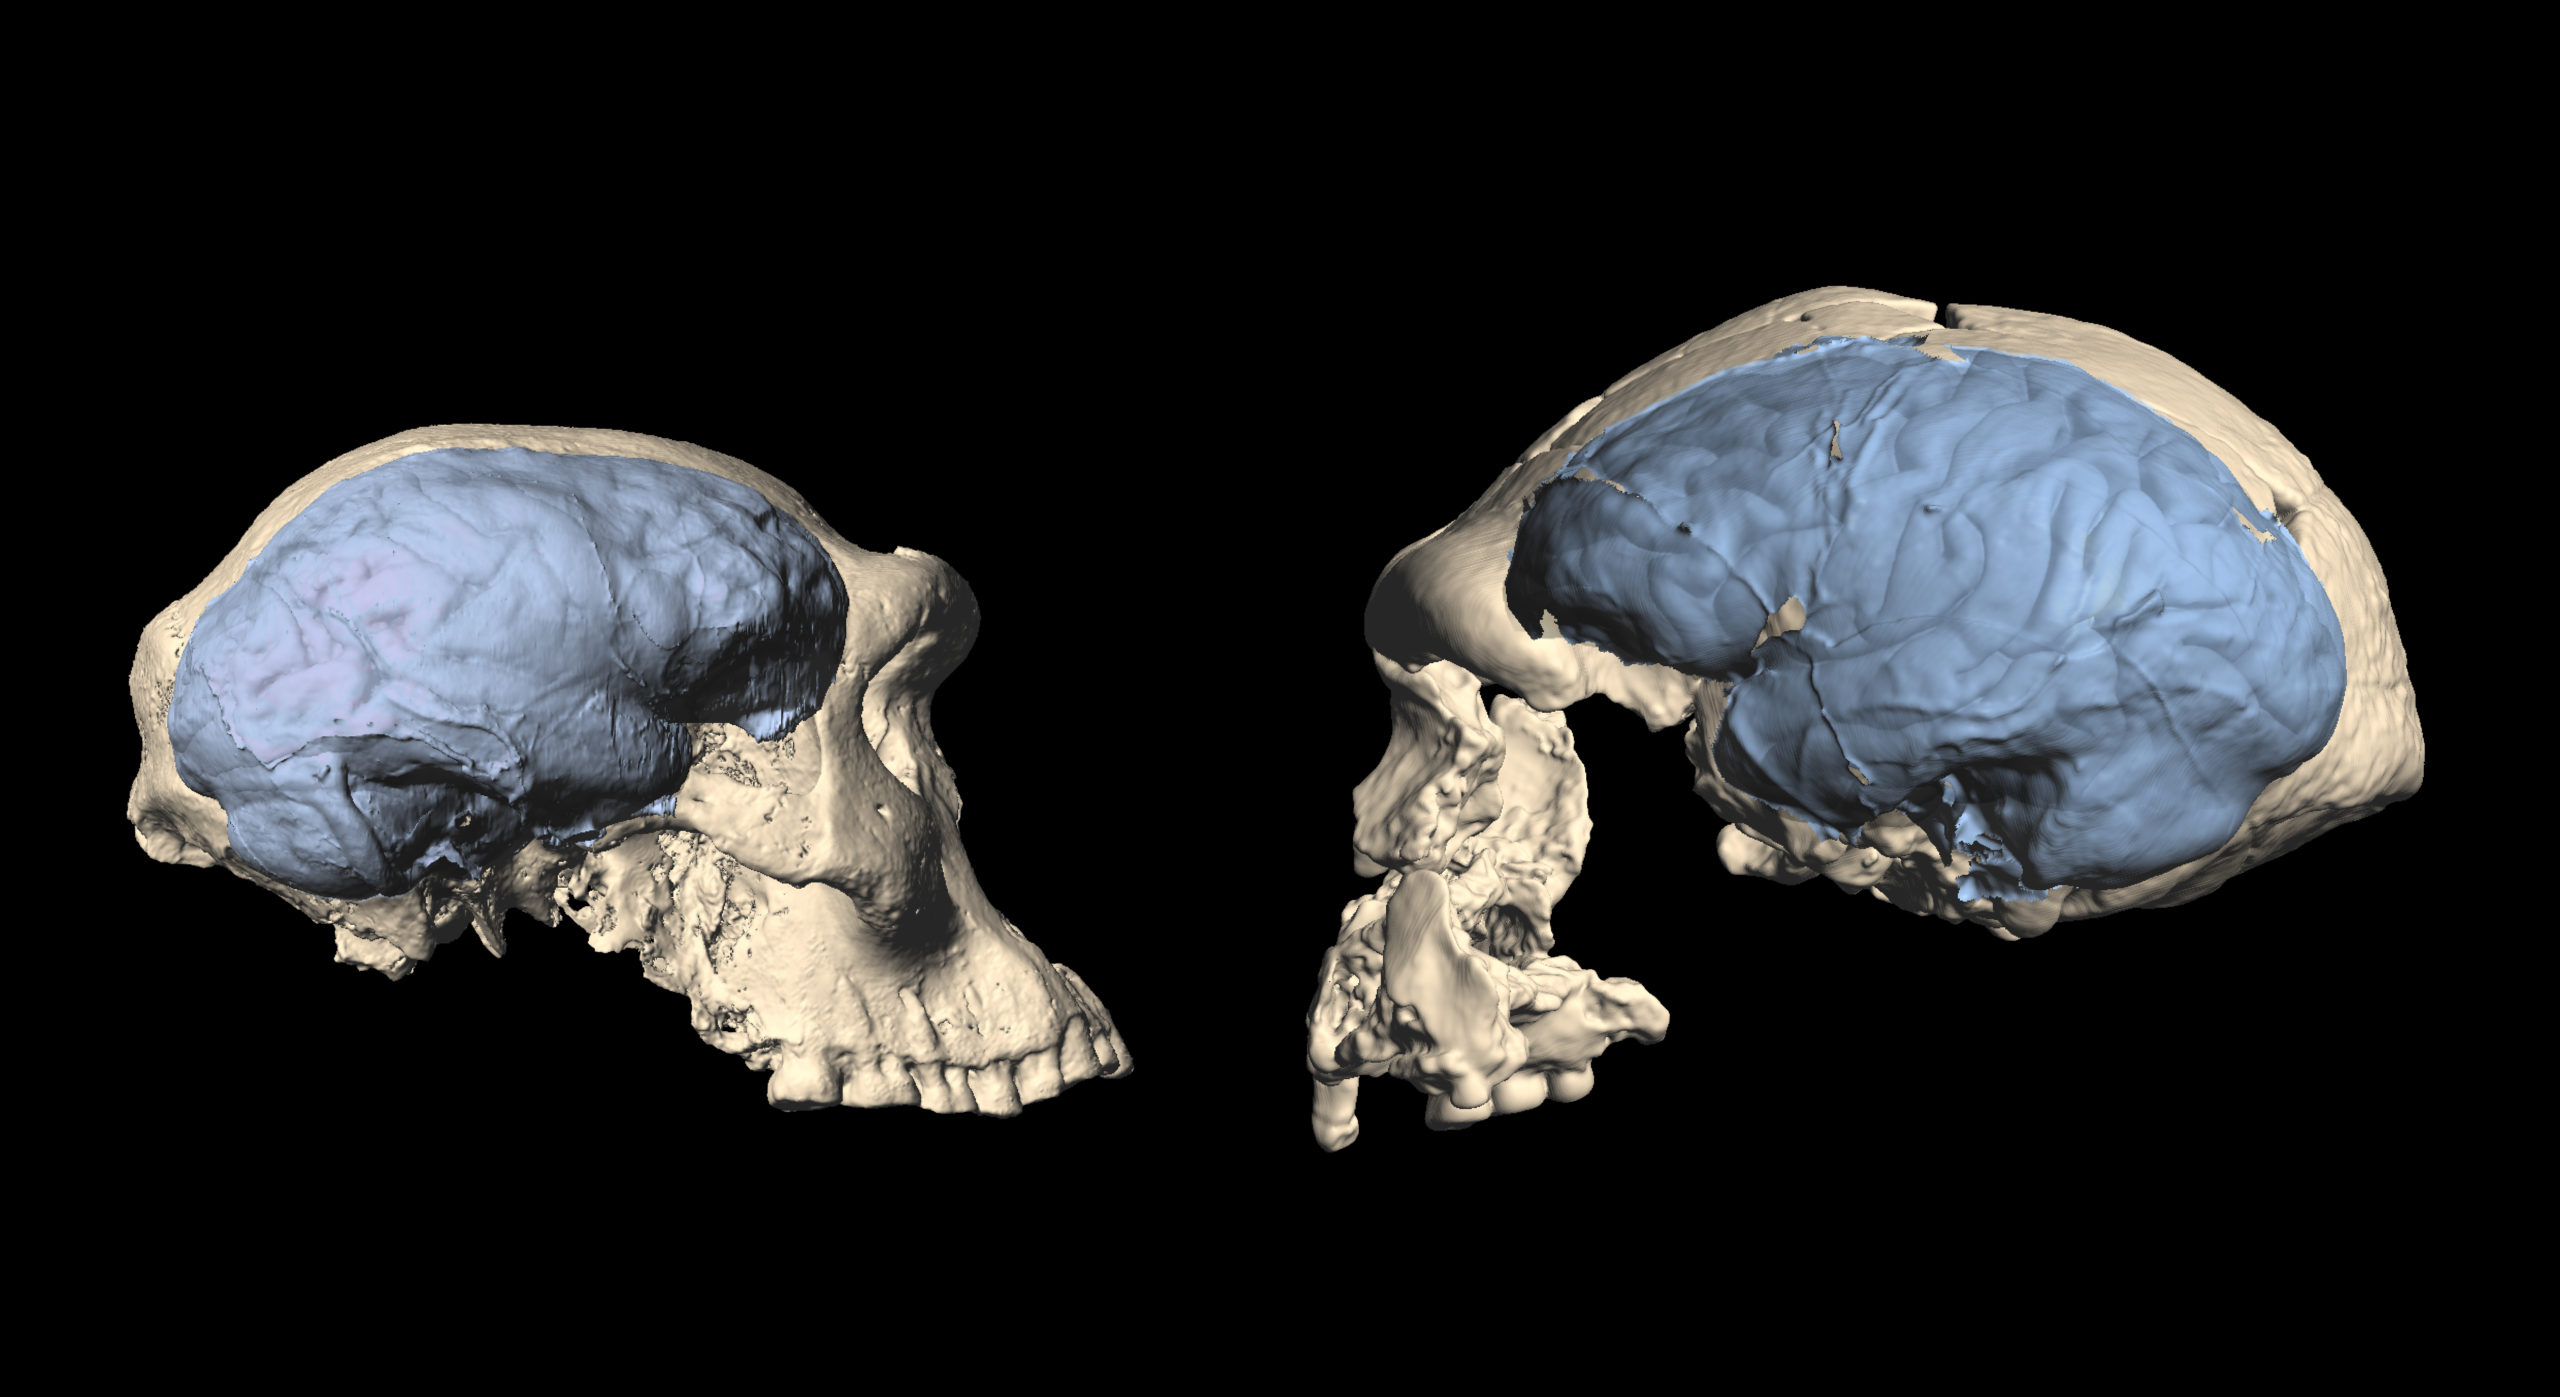 A Dmanisi specimen (left) compared with a more cognitively developed Homo erectus from Indonesia (right). (Image: M. Ponce De León and Ch. Zollikofer, University of Zurich)